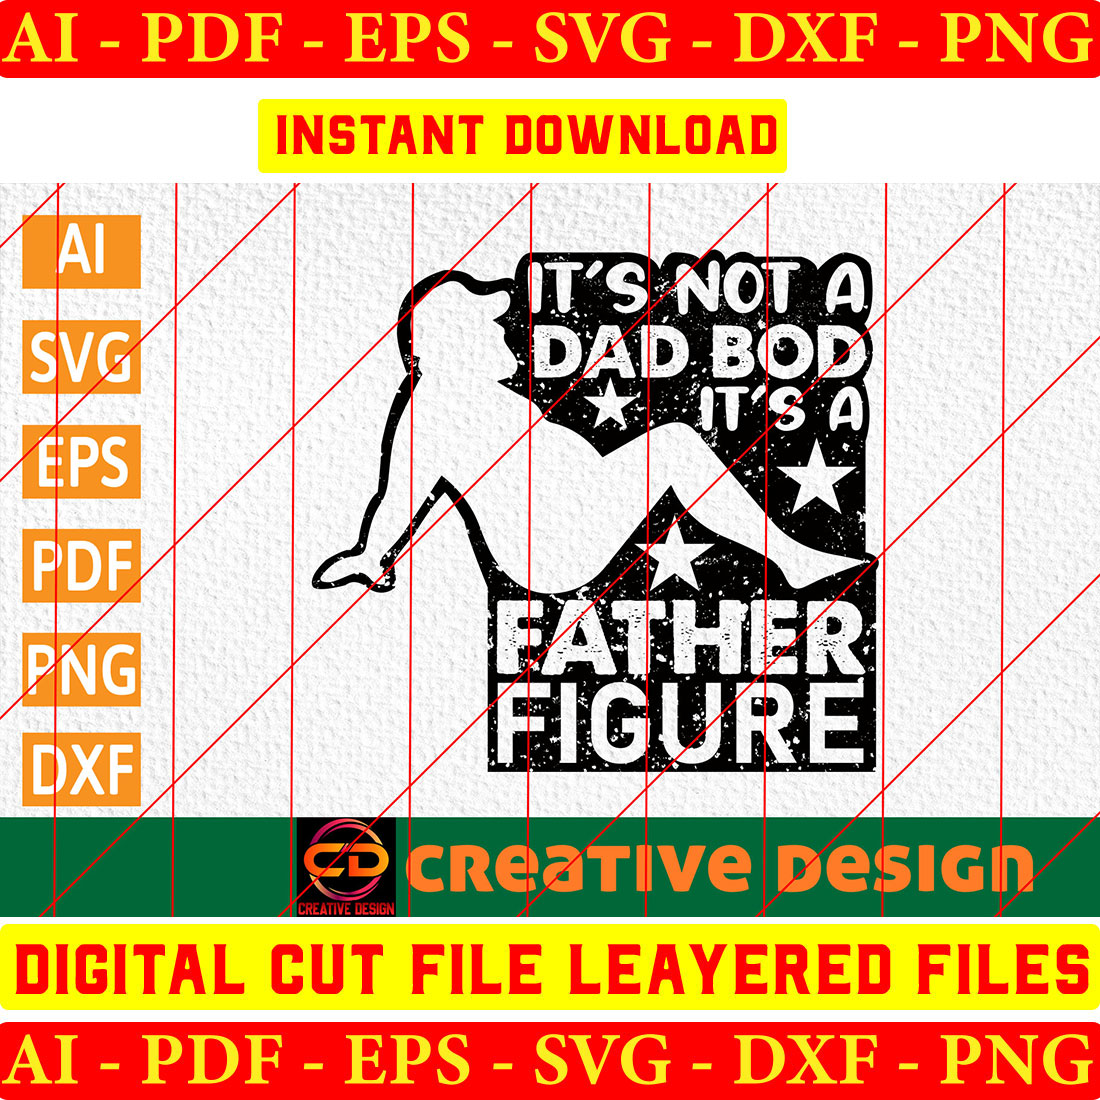 It's not a dad bod it's a father figure cut file.